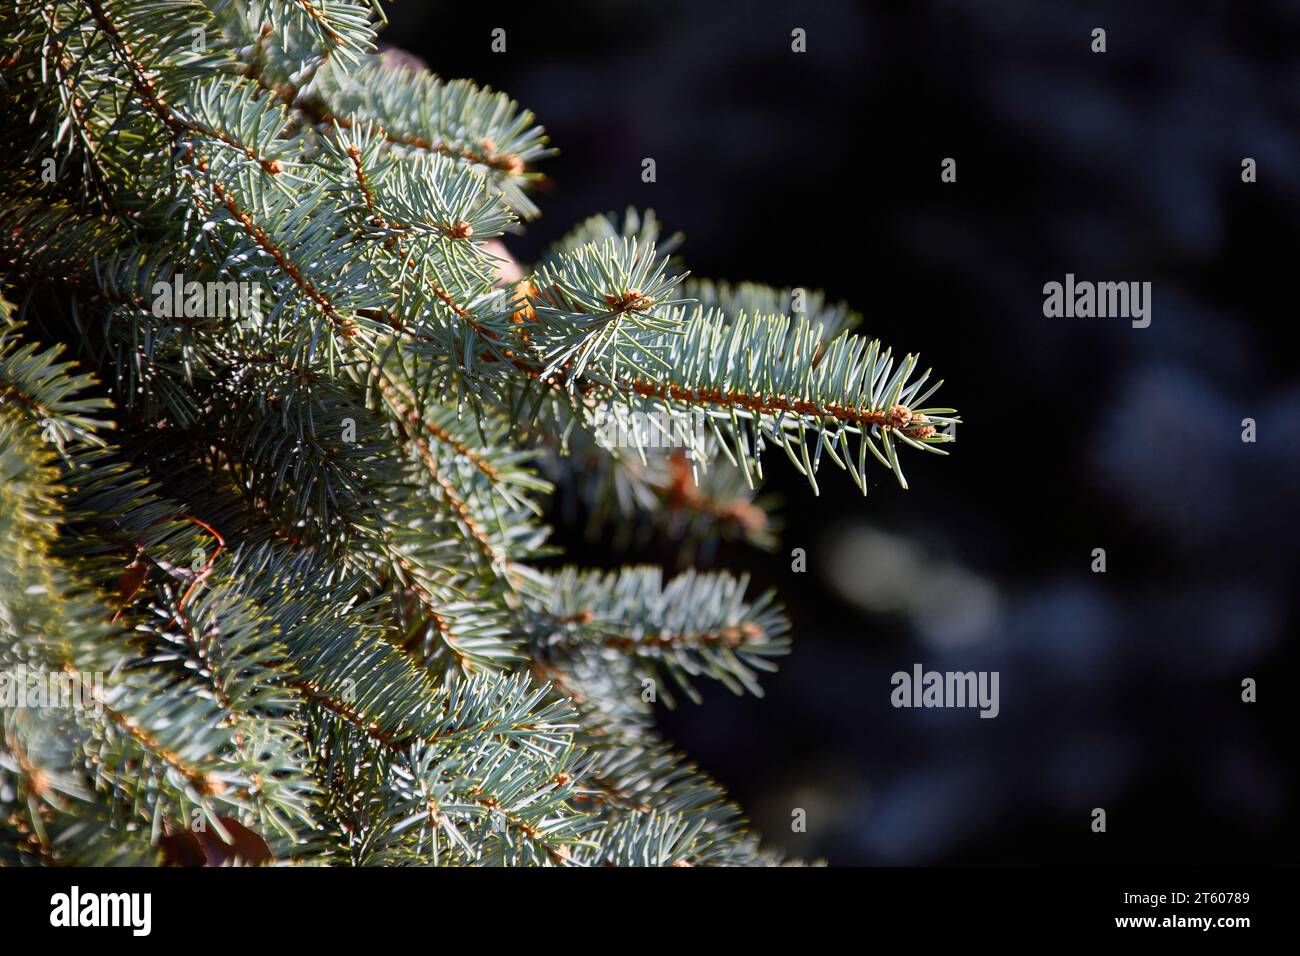 Image of a blue spruce branch in a city park Stock Photo